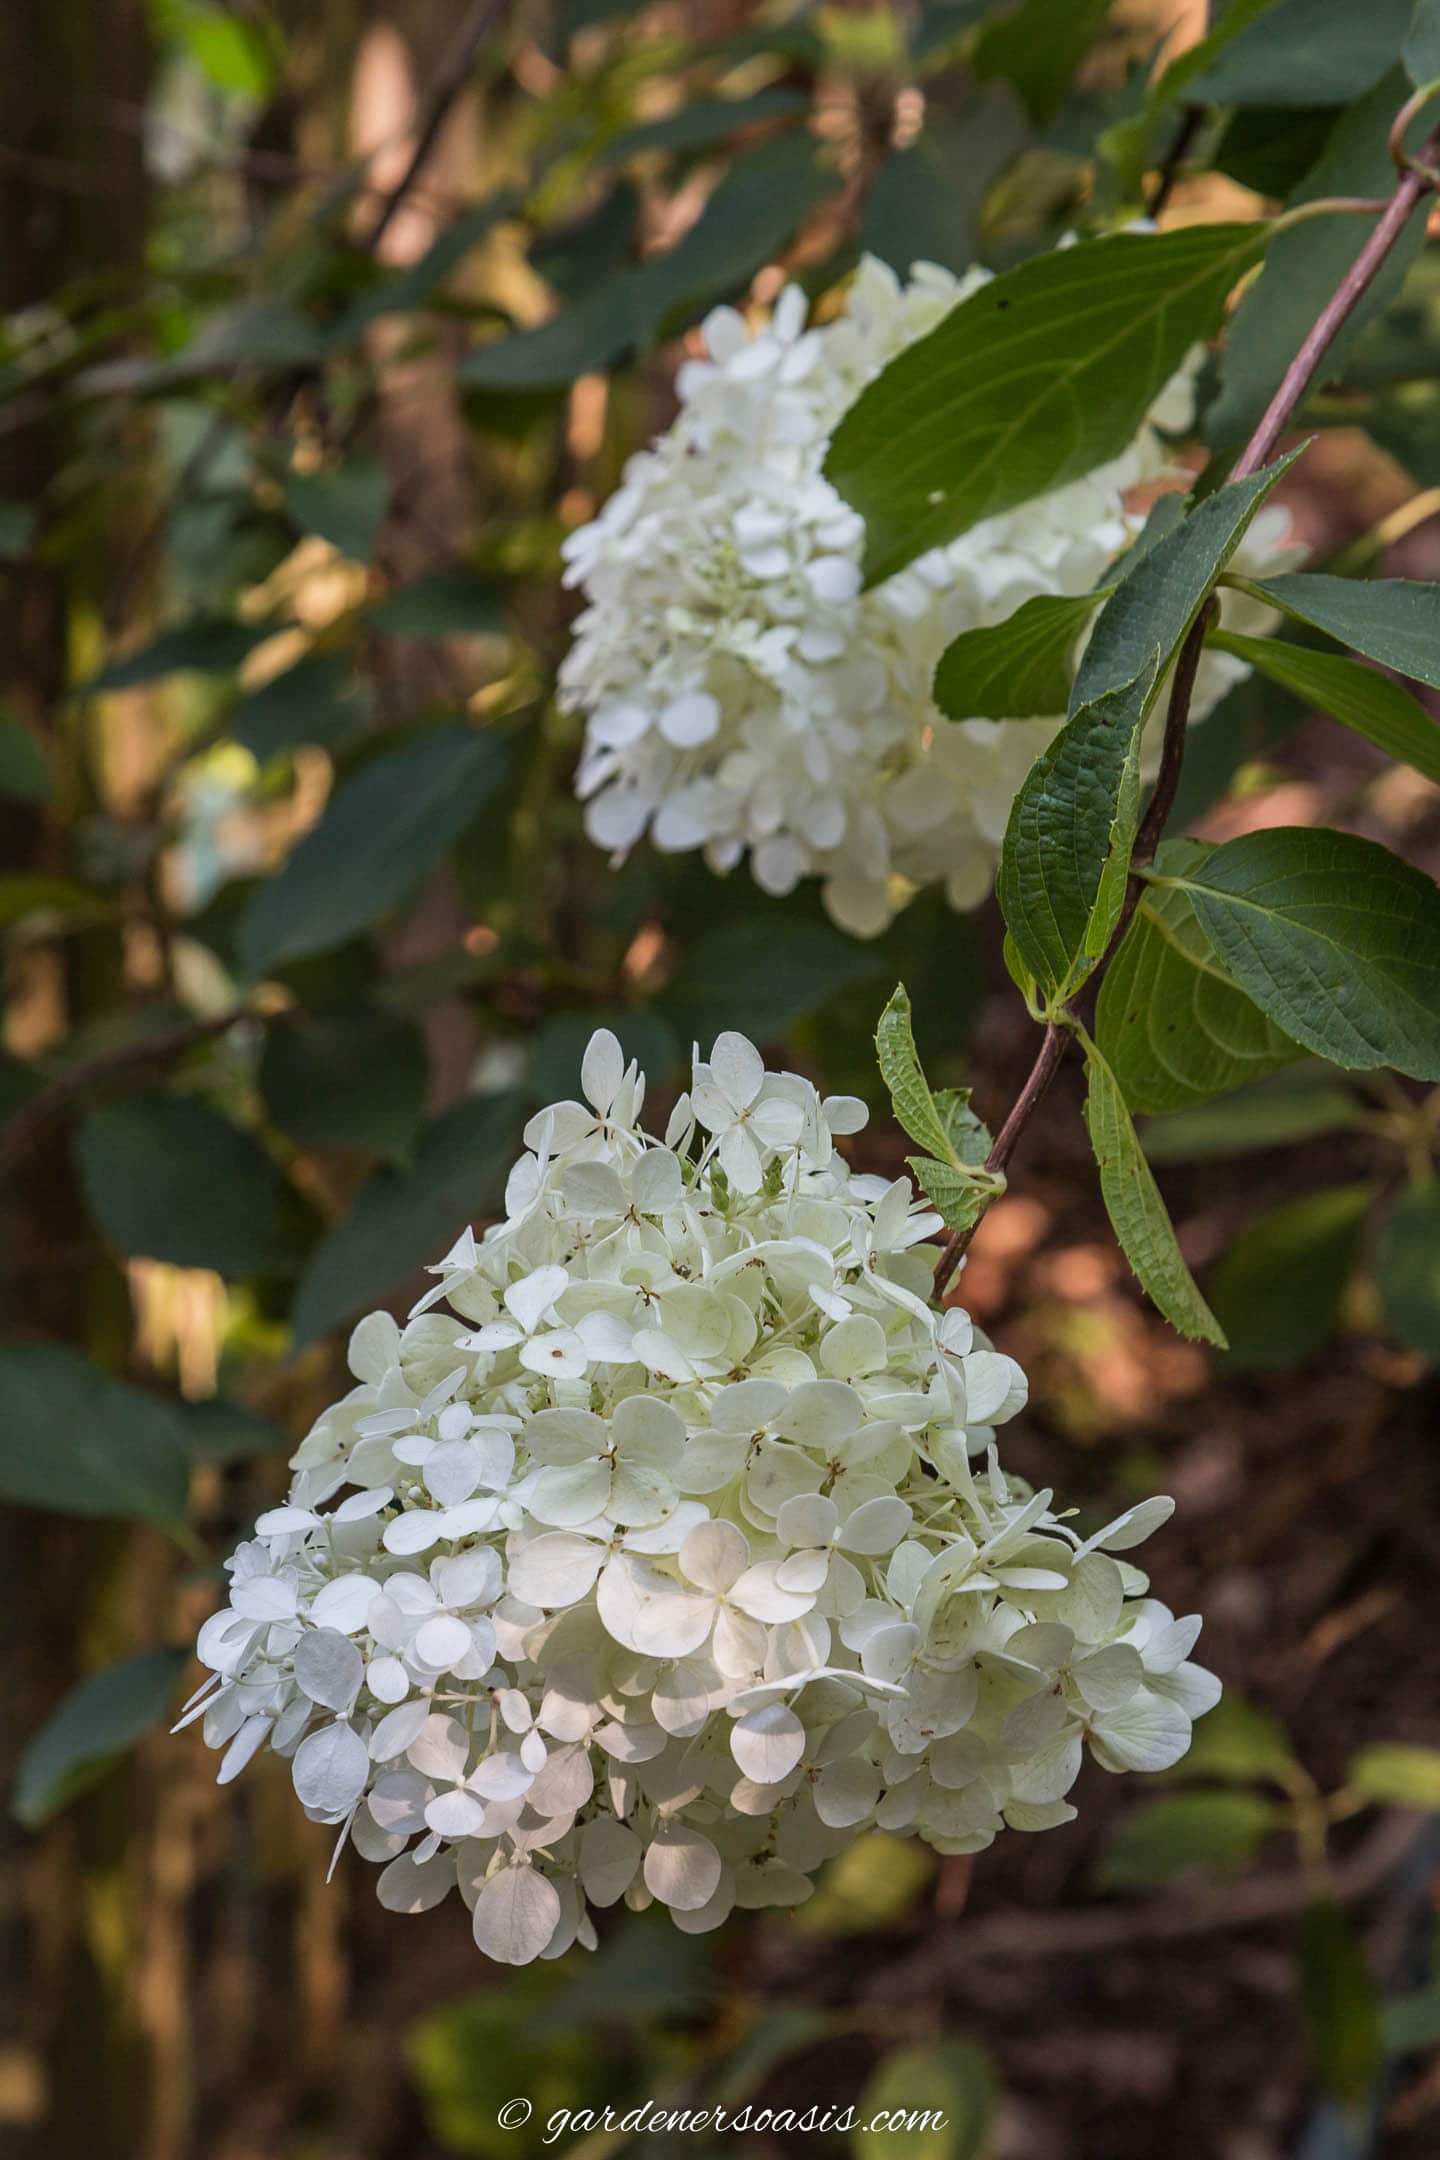 Hydrangea paniculata "Pee Gee" during the "white" stage of flowering